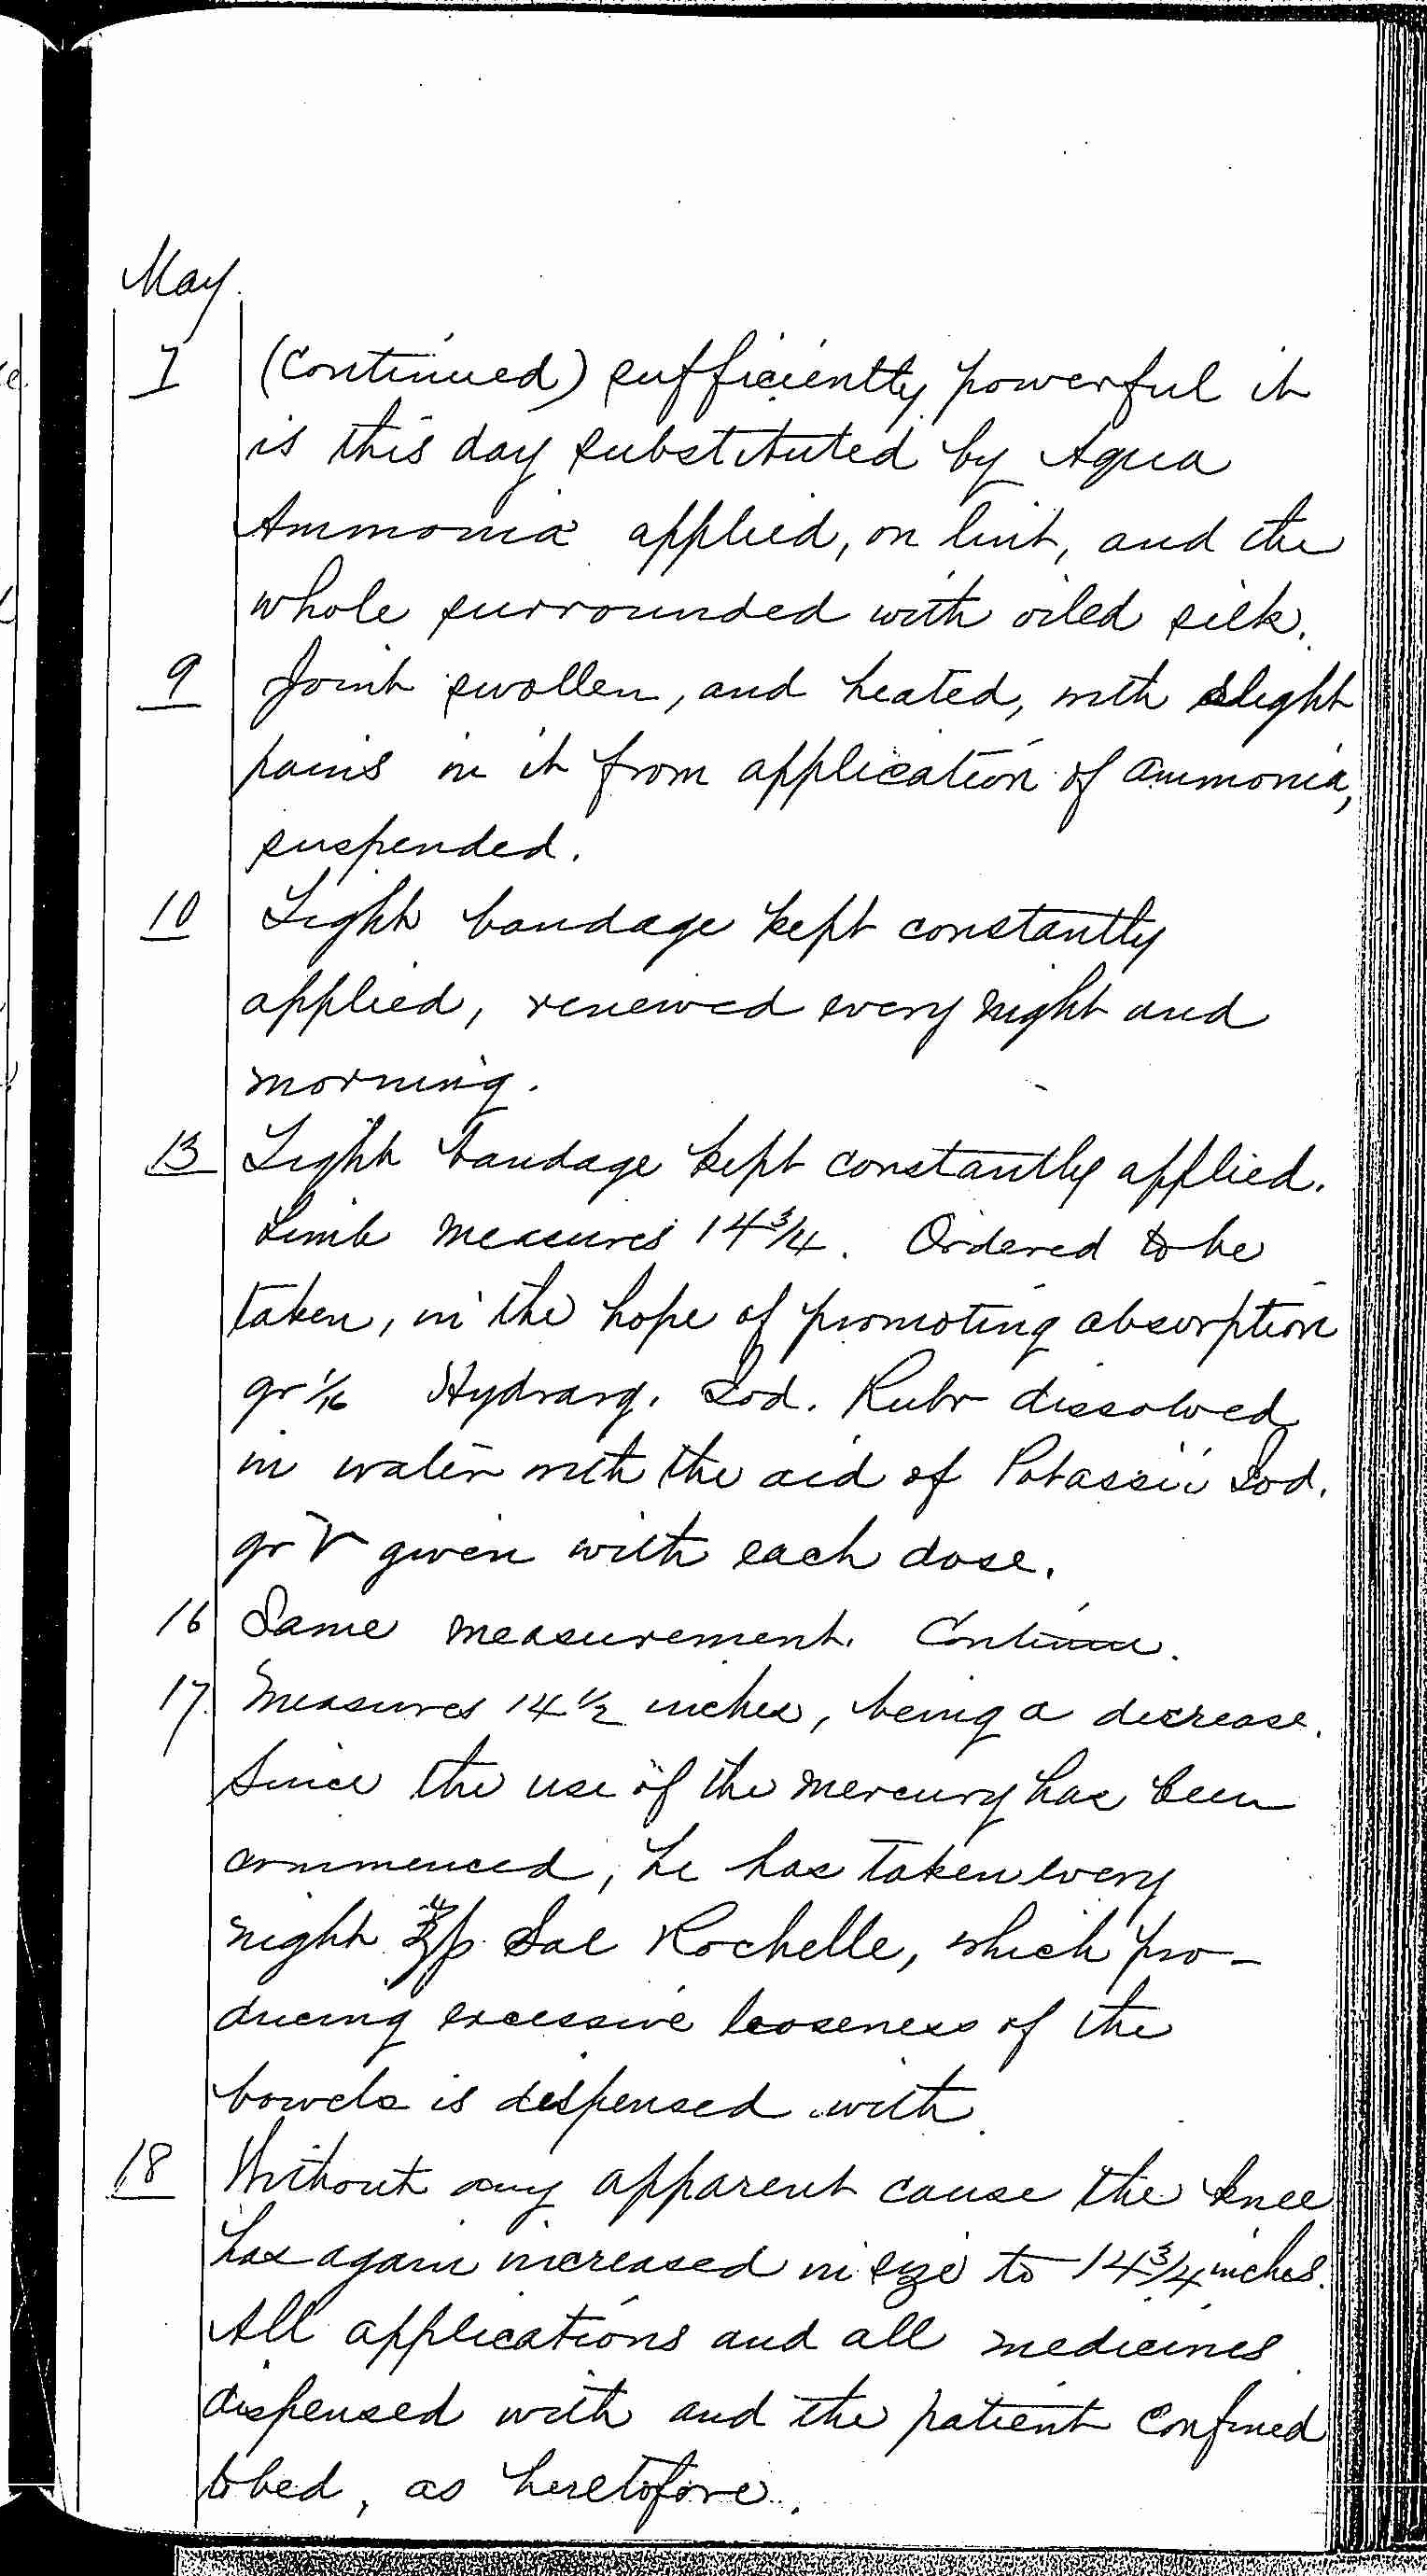 Entry for Henry James (page 7 of 8) in the log Hospital Tickets and Case Papers - Naval Hospital - Washington, D.C. - 1868-69